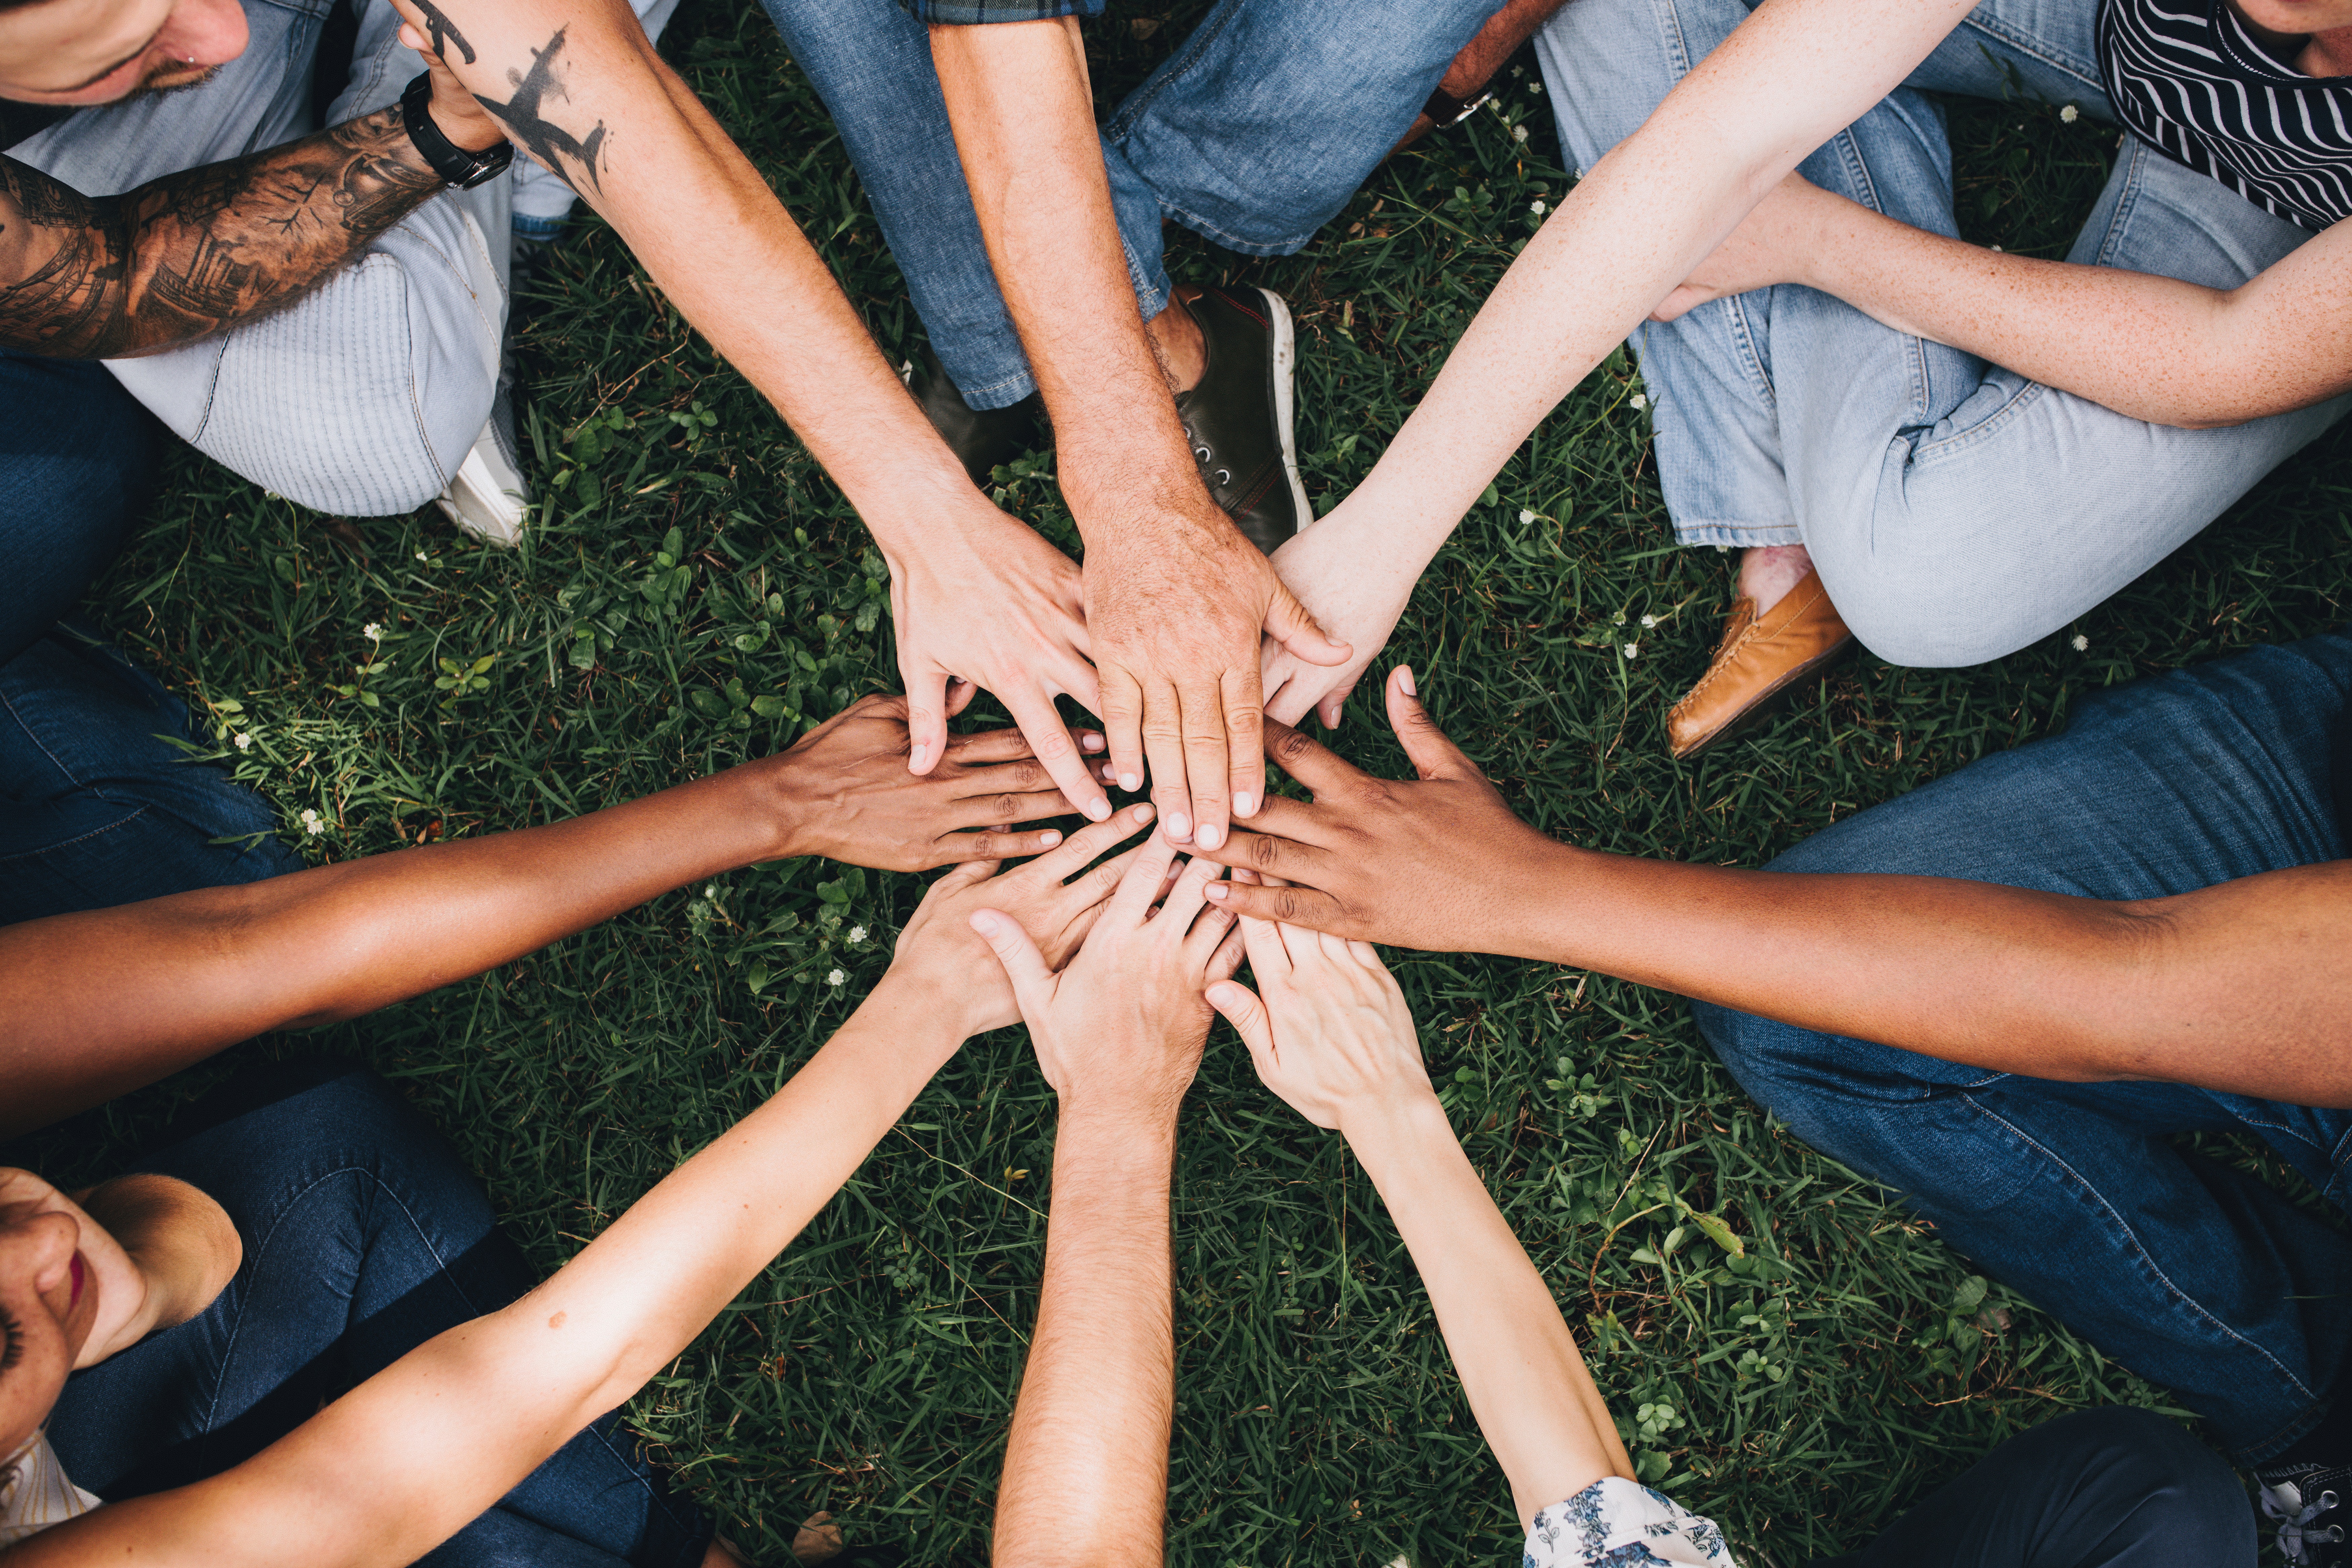 A group of people sitting on the ground, placing their hands together in a circle